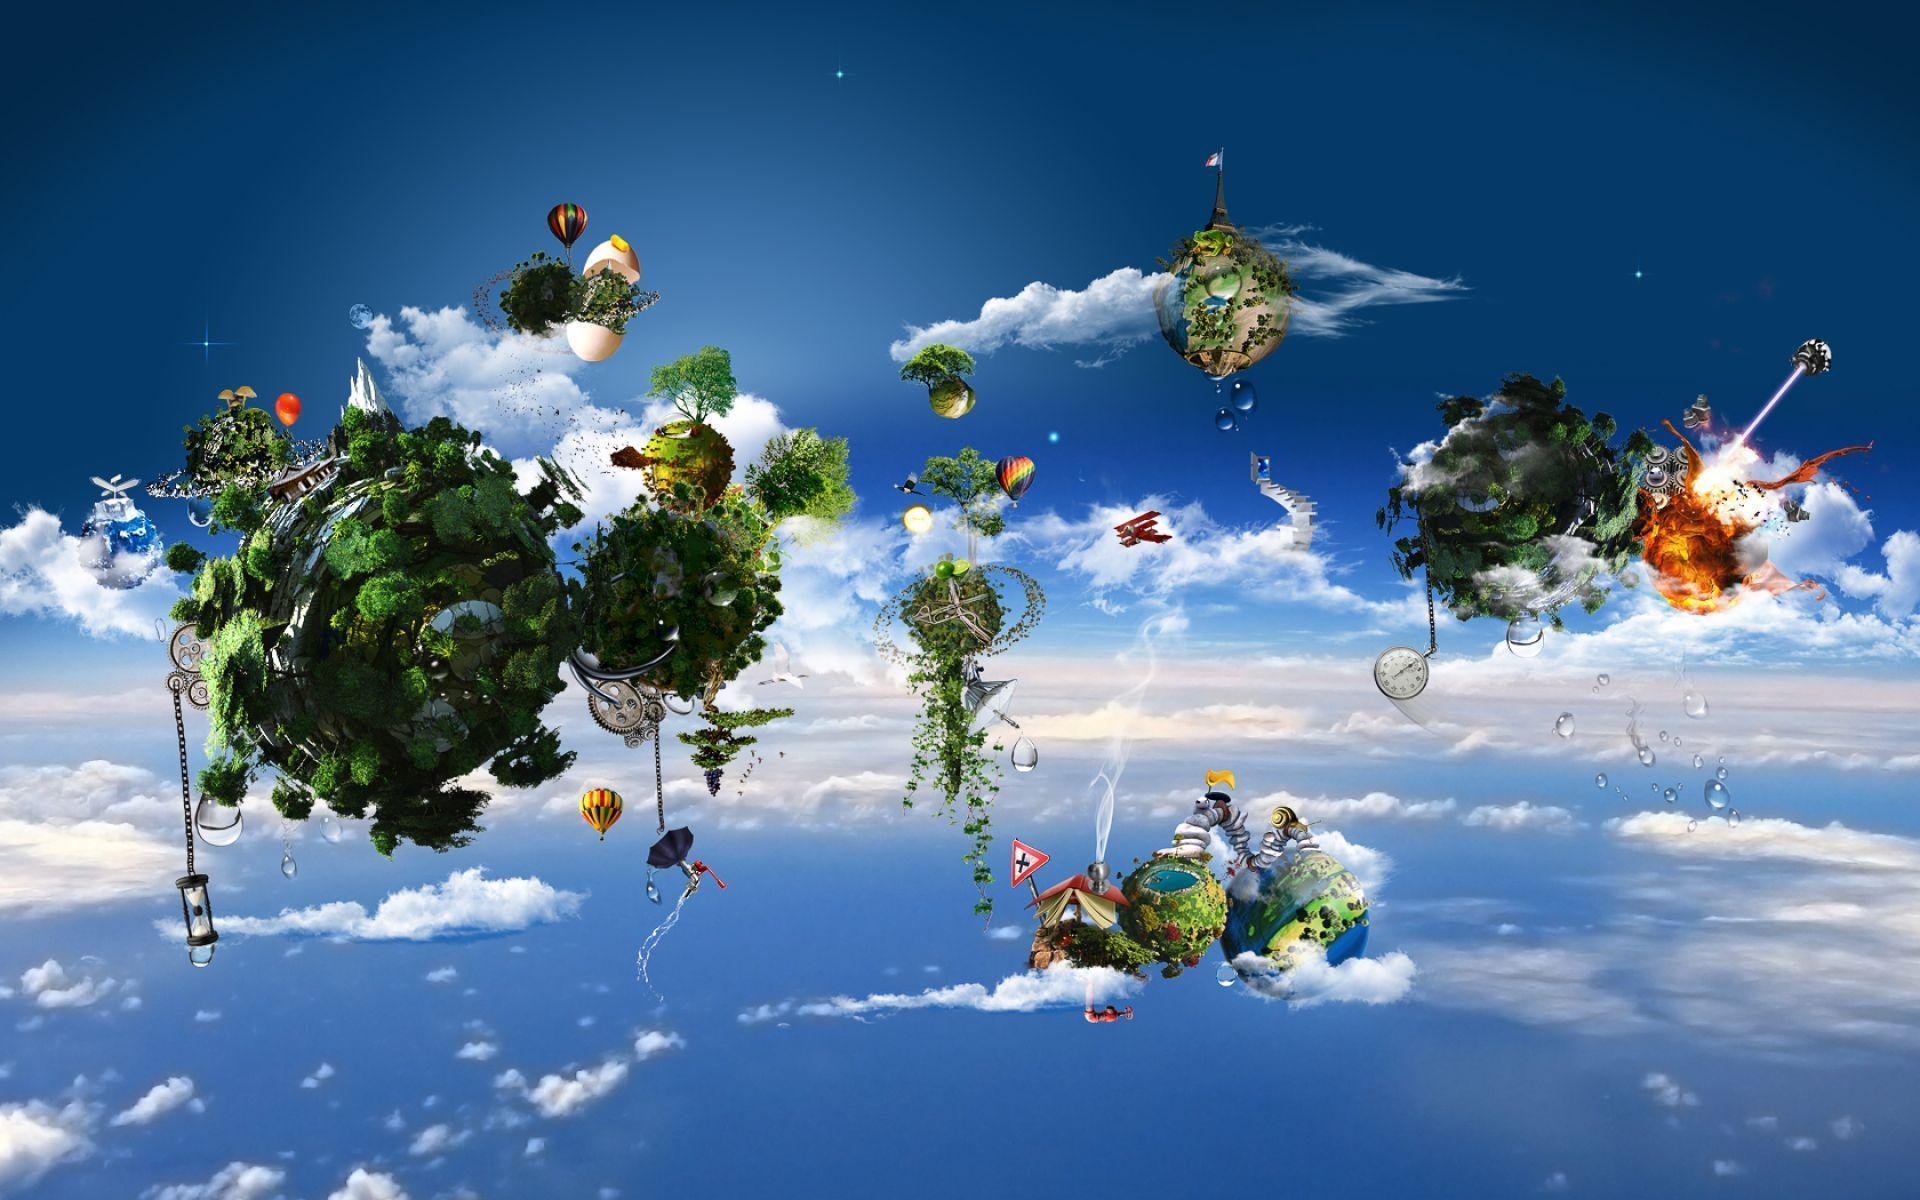 Amazing 3D Cloud And Nature Wallpaper. HD 3D and Abstract